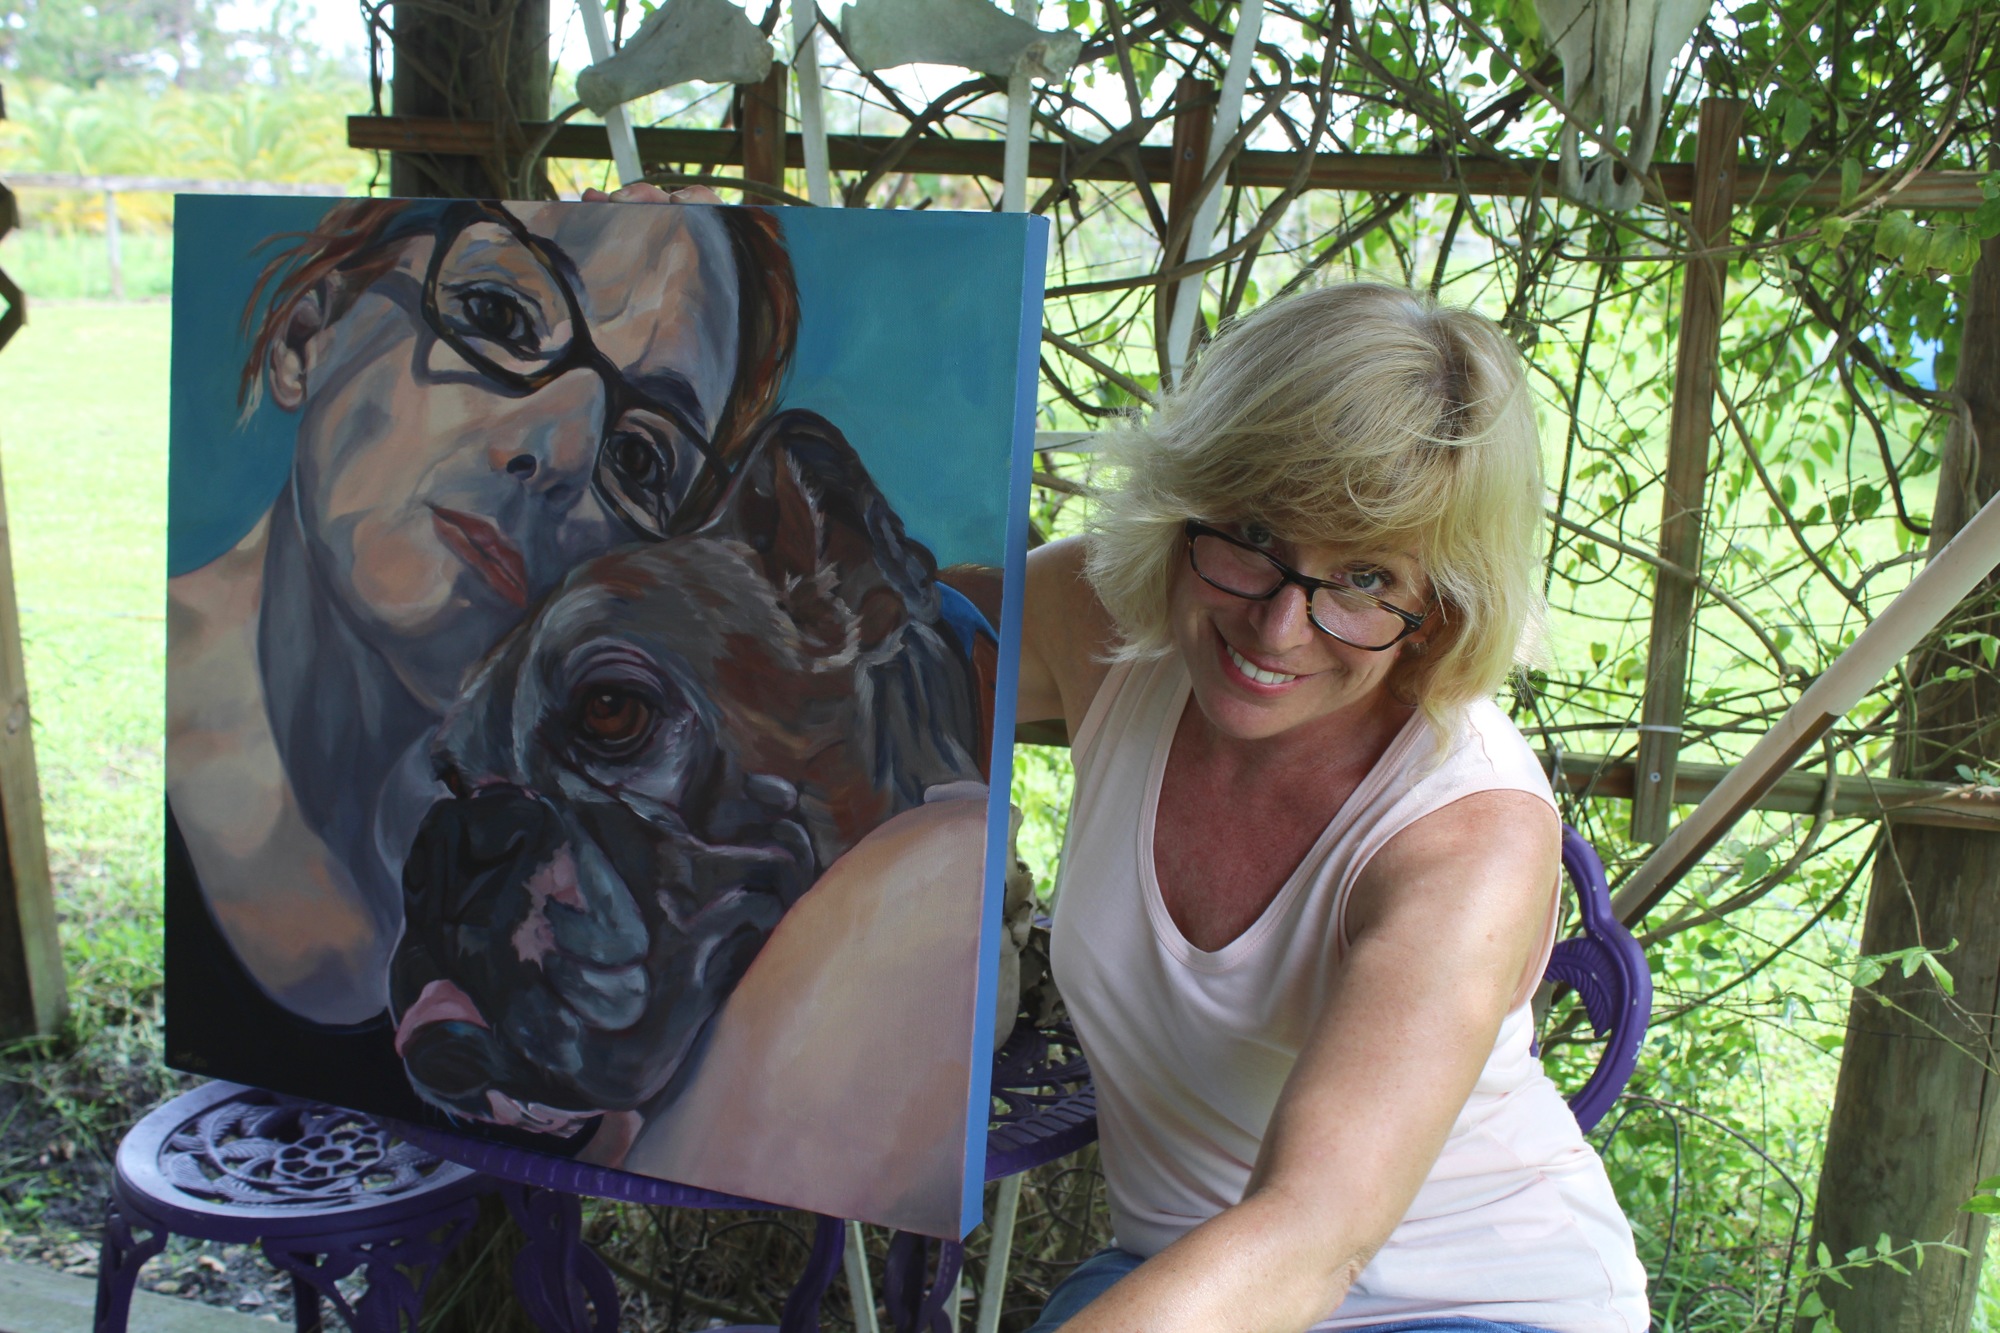 velyn McCorristin Peters holds one of her favorite portraits of her and her dog, Abby, who died years ago.